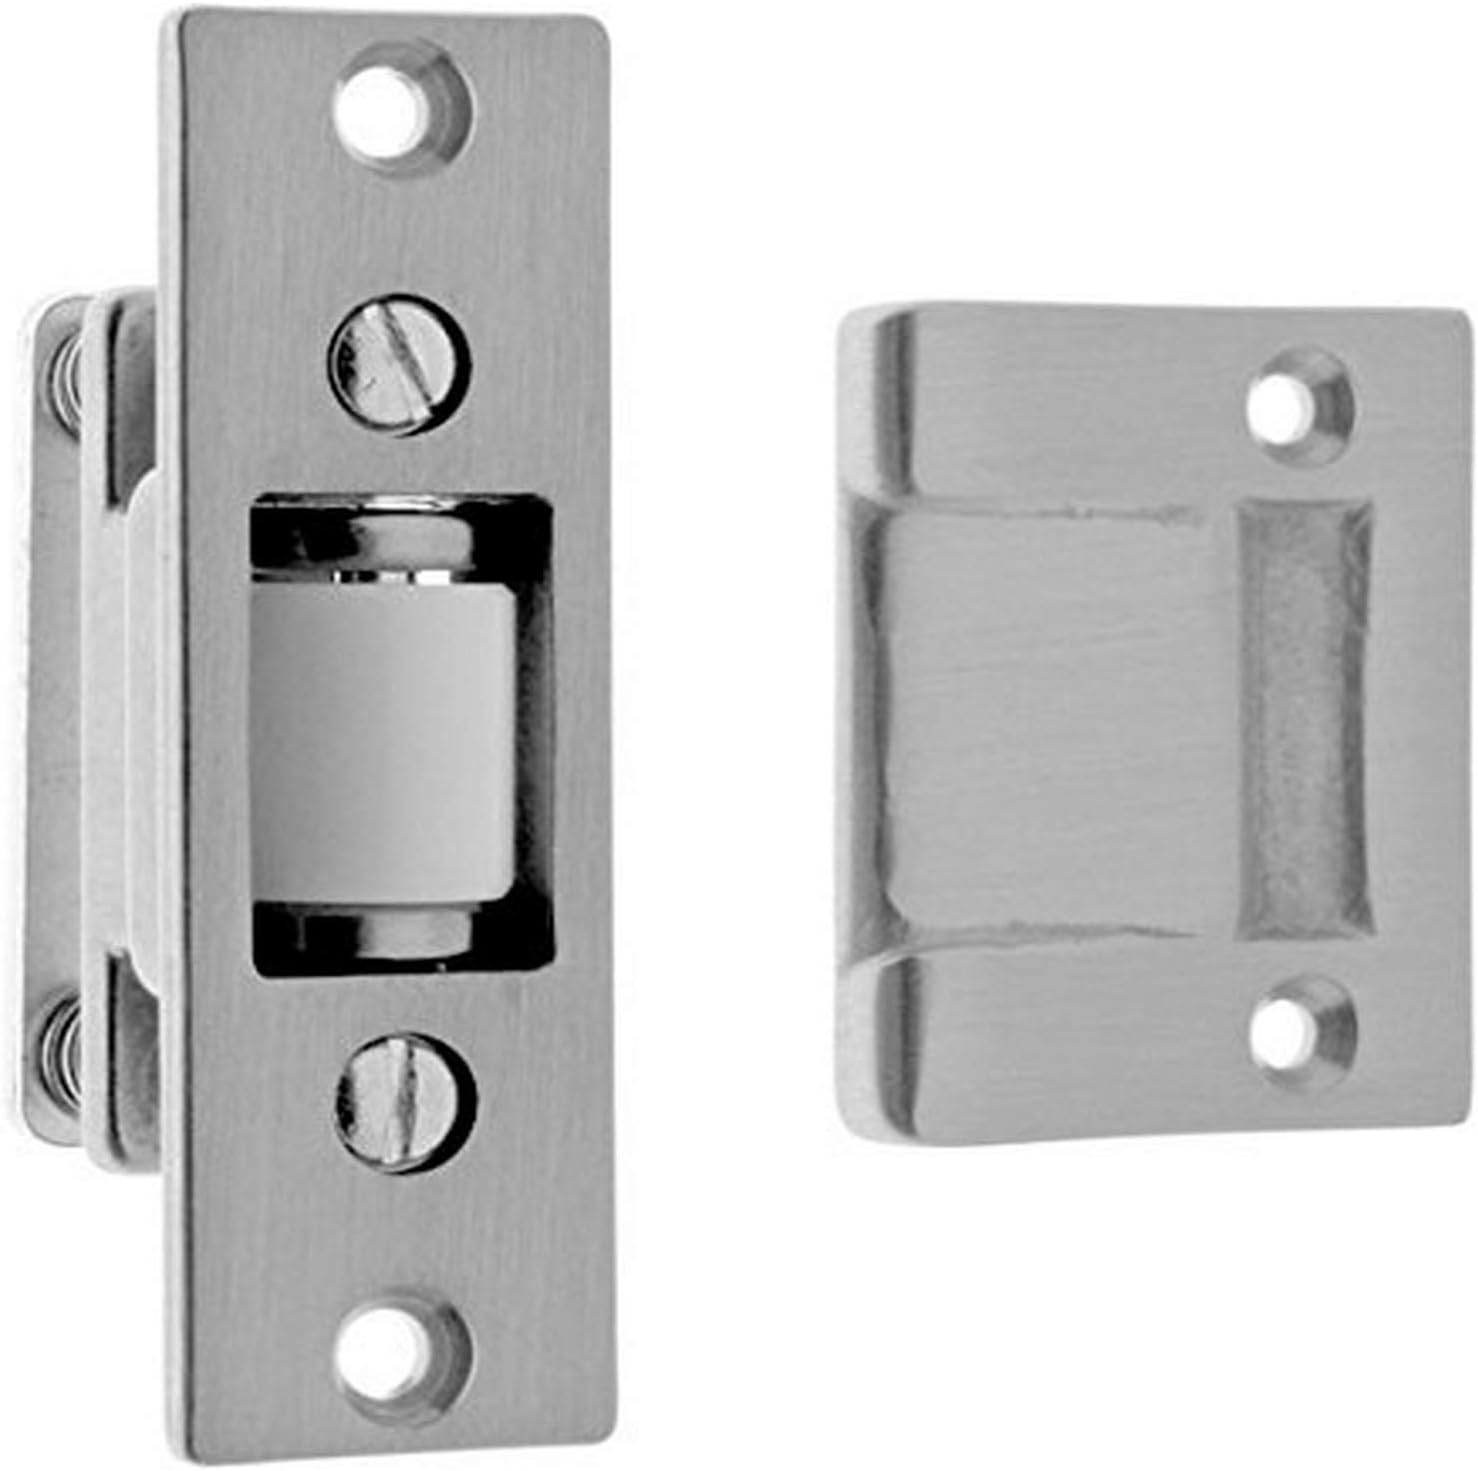 IDHBA idh by St. Simons 12017-26D Premium Quality Solid Brass Heavy Duty Silent Roller Latch with Adjustable Square Strike, Satin Chr